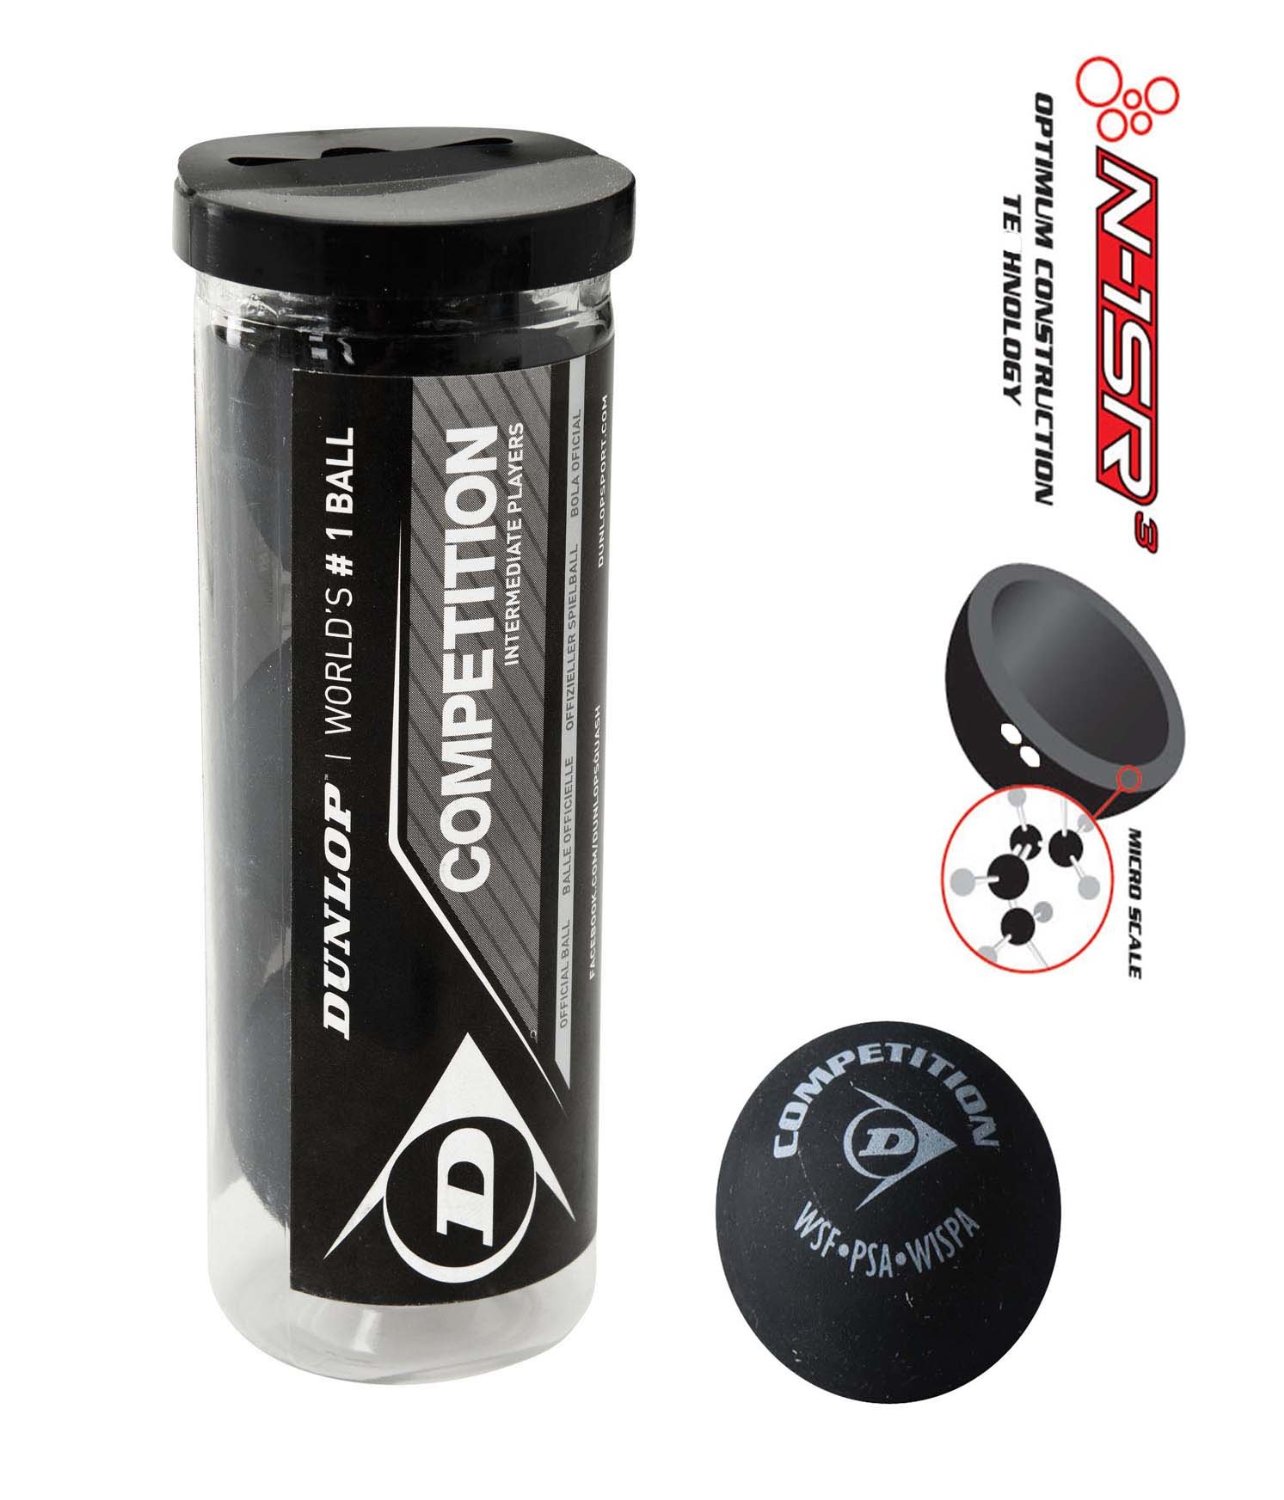 Squashball Dunlop Competition 1x gelb 3 Bälle in der Tube